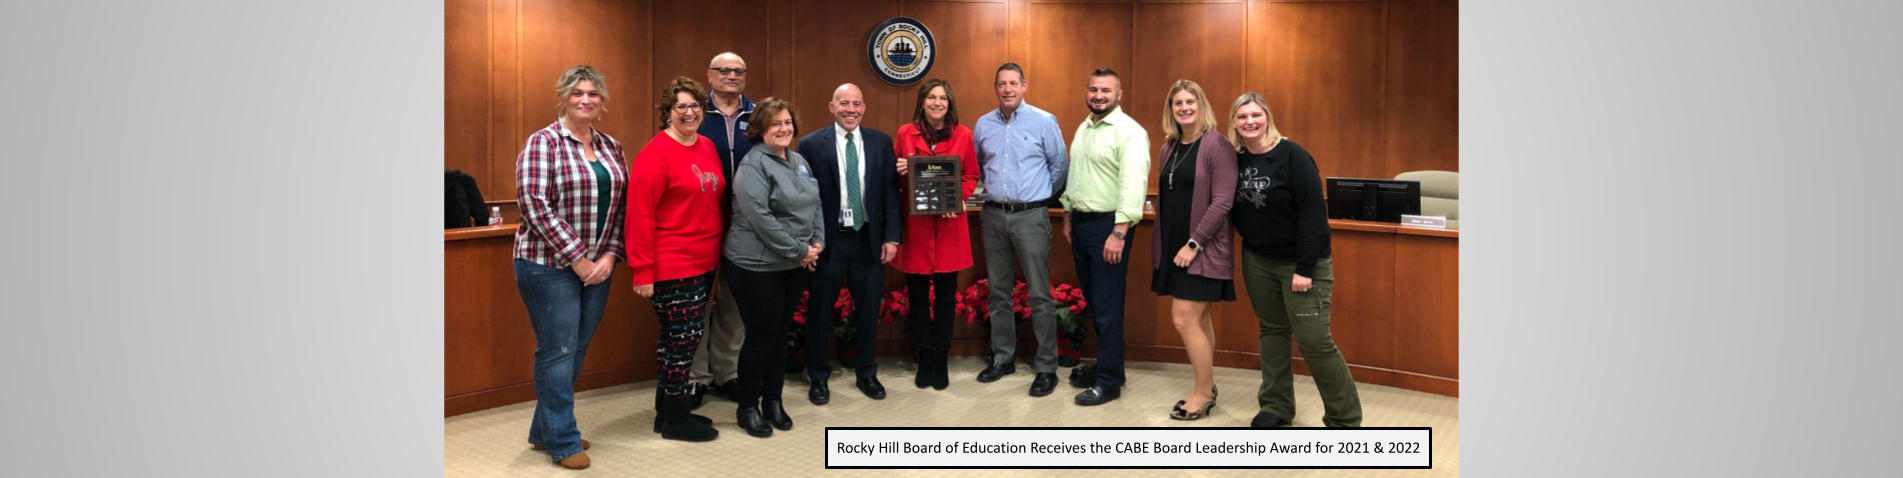 Rocky Hill Board of Education Receives the CABE Board Leadership Award for 2021 & 2022